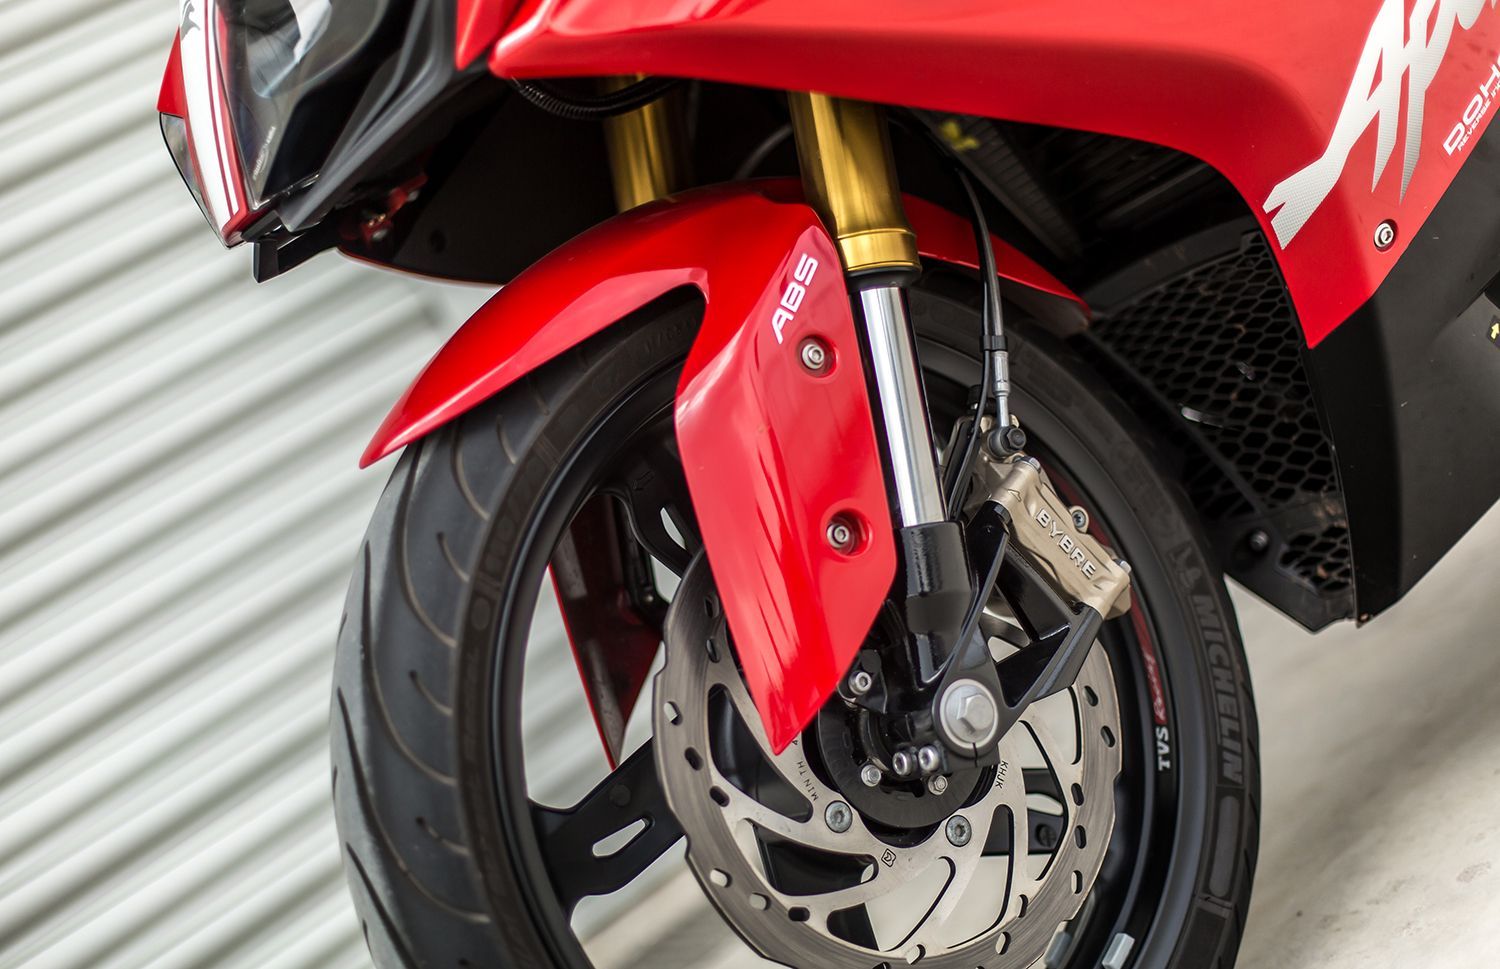 TVS Apache RR 310 Launched